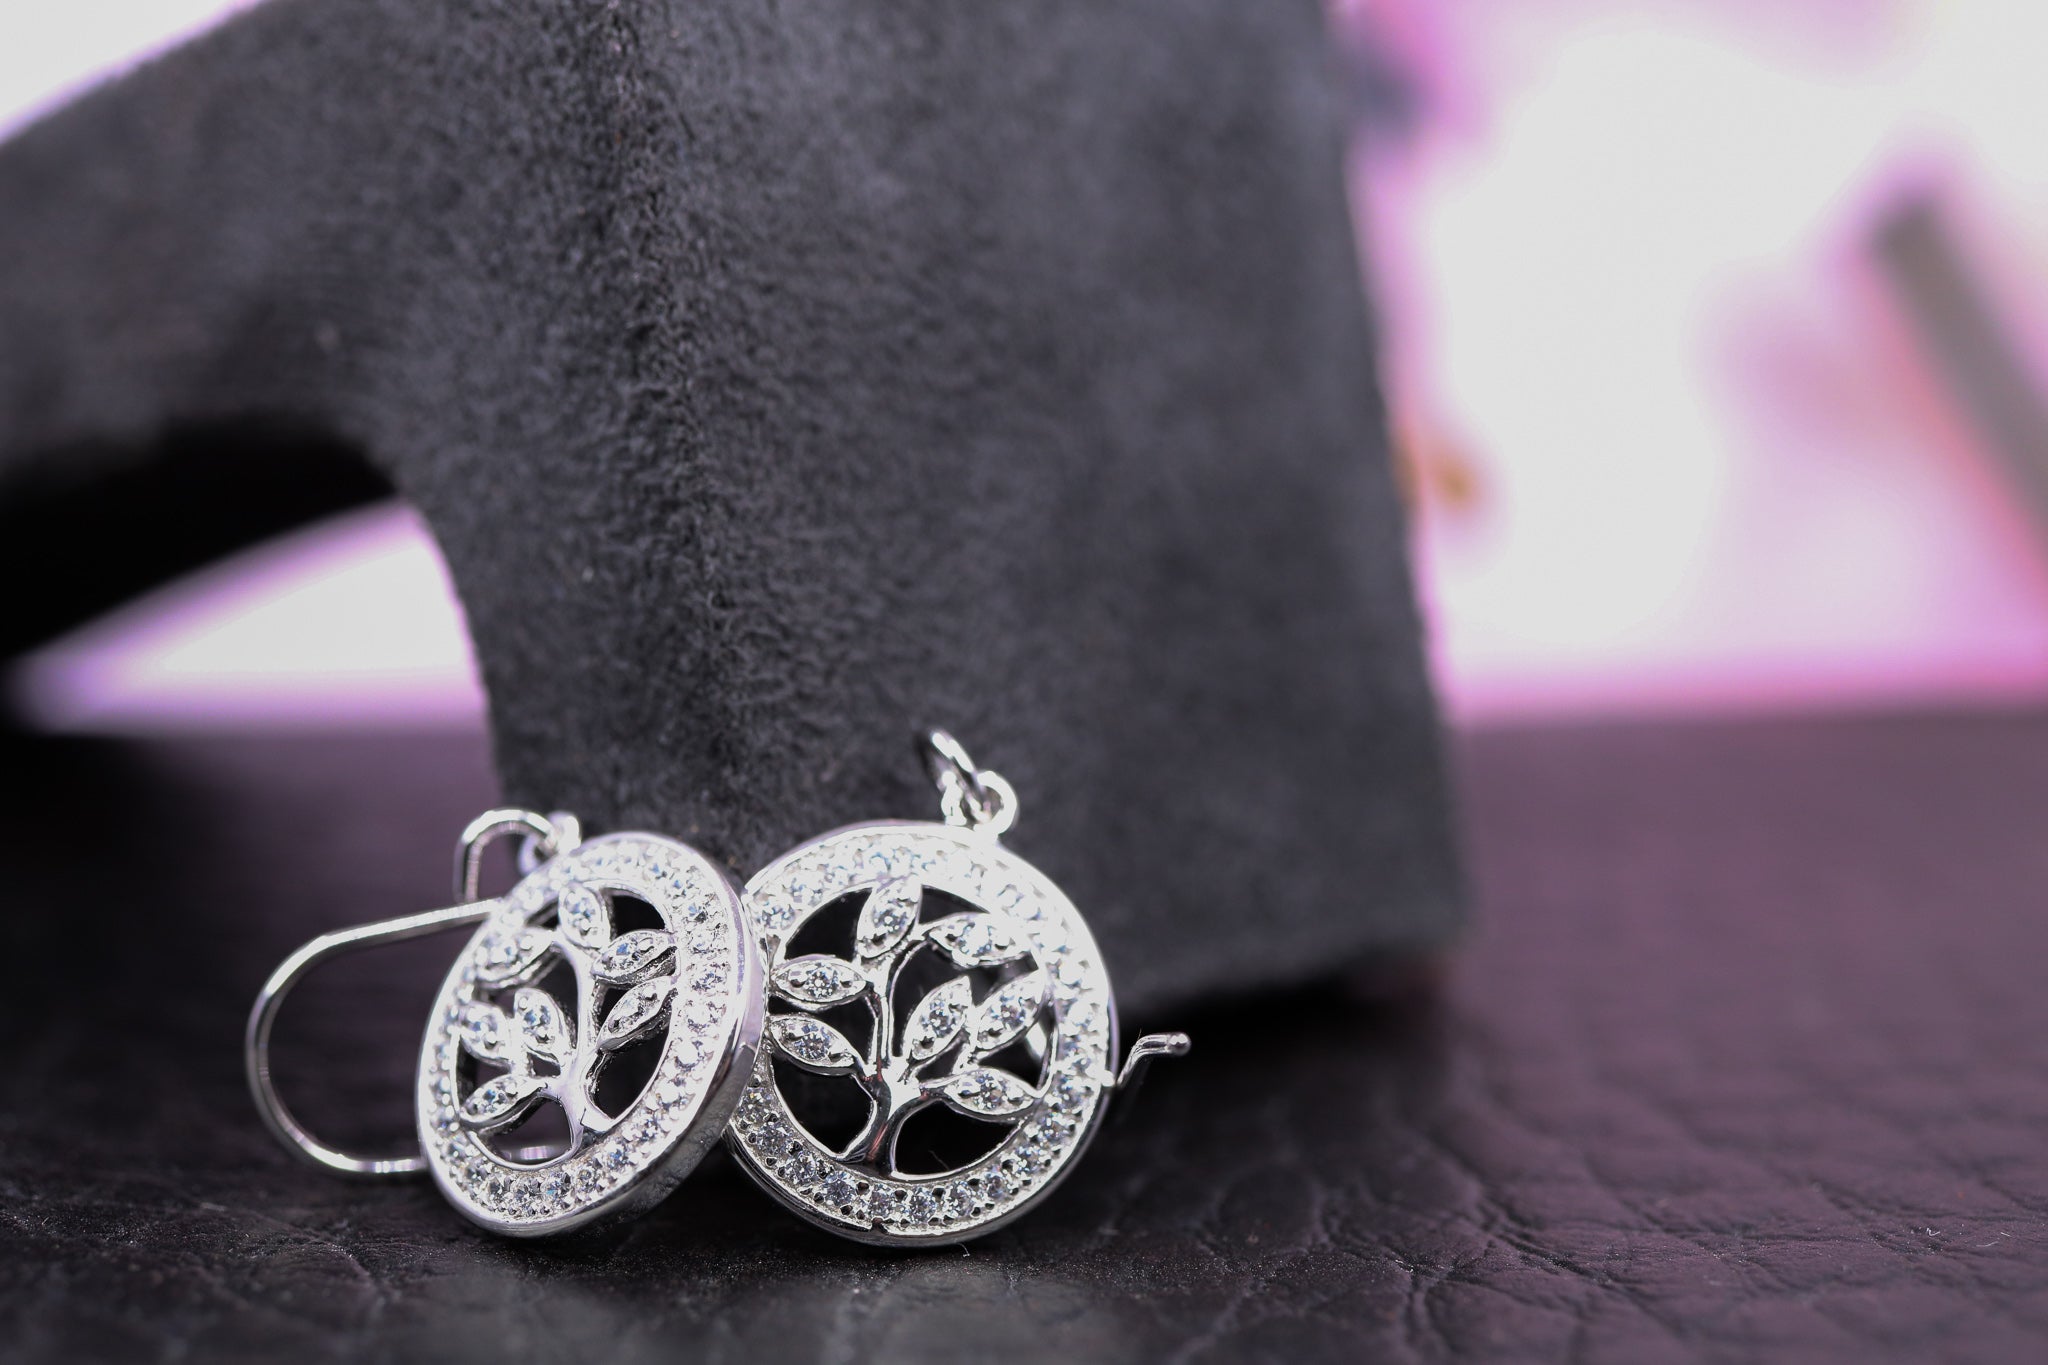 Jools Sterling Silver Earrings - JL1013 - Hallmark Jewellers Formby & The Jewellers Bench Widnes